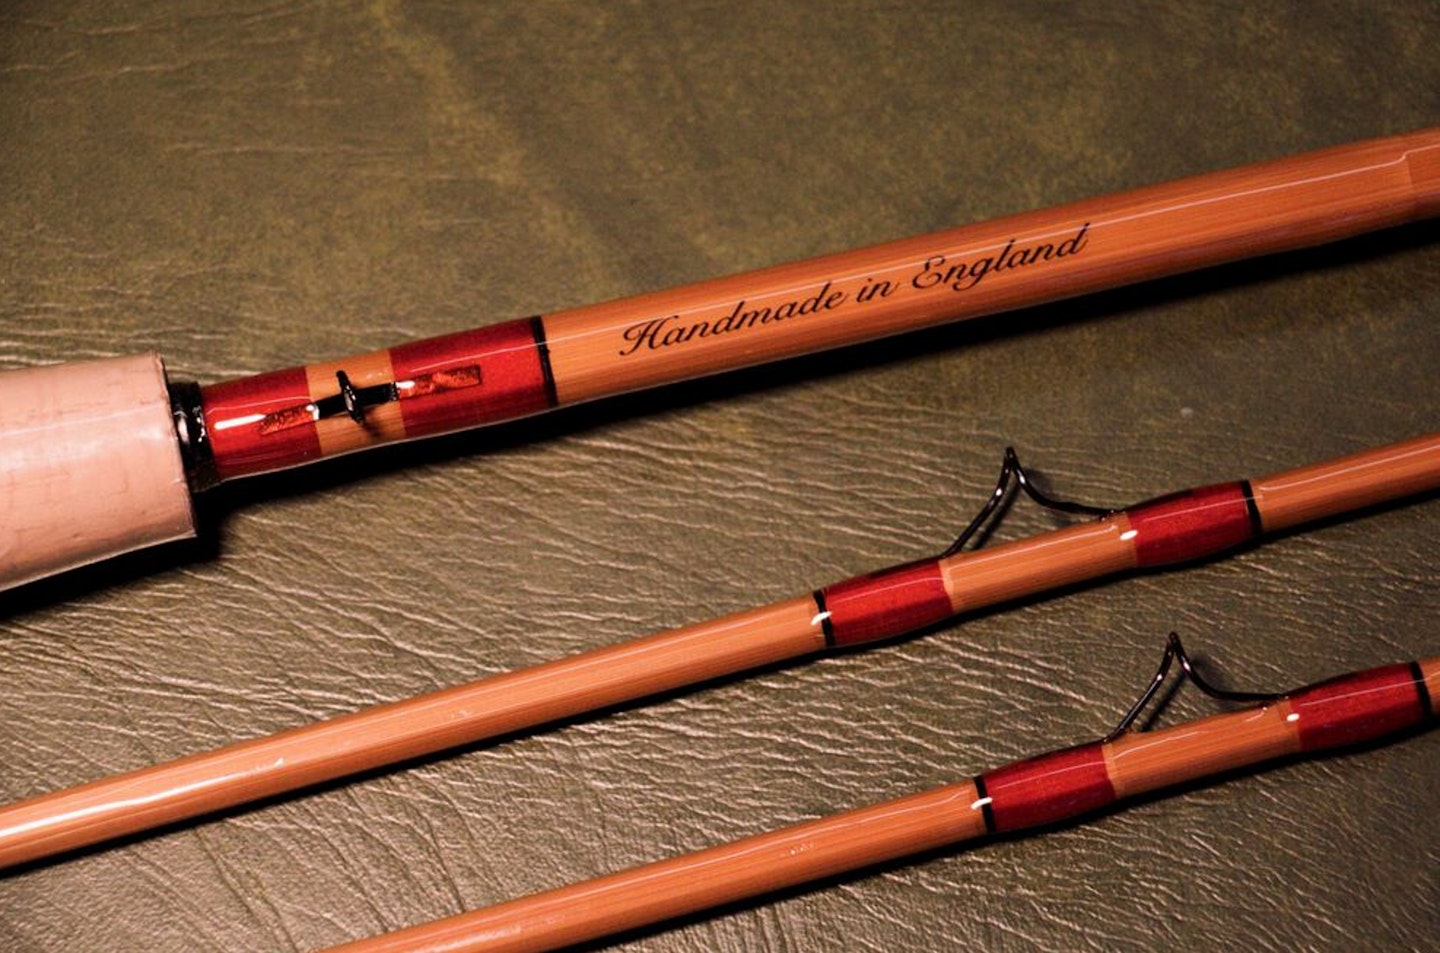 Cane, fibreglass and rods made in Great Britain